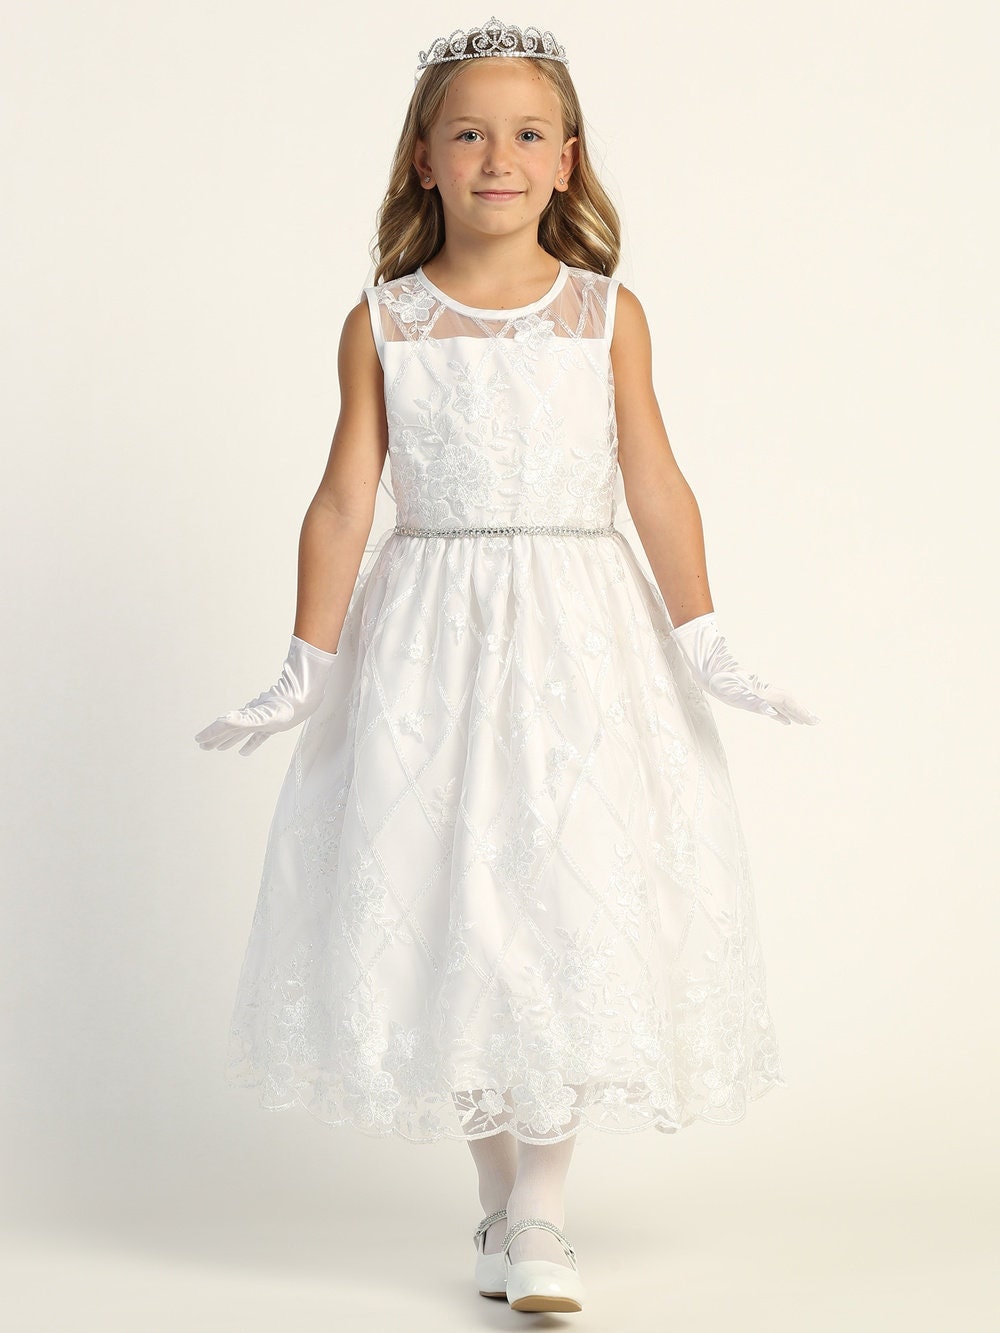 A girl wearing a sparkling white First Communion Dress adorned with embroidered tulle and sequins, featuring a soft acetate lining. (This is the actual image from the listing)